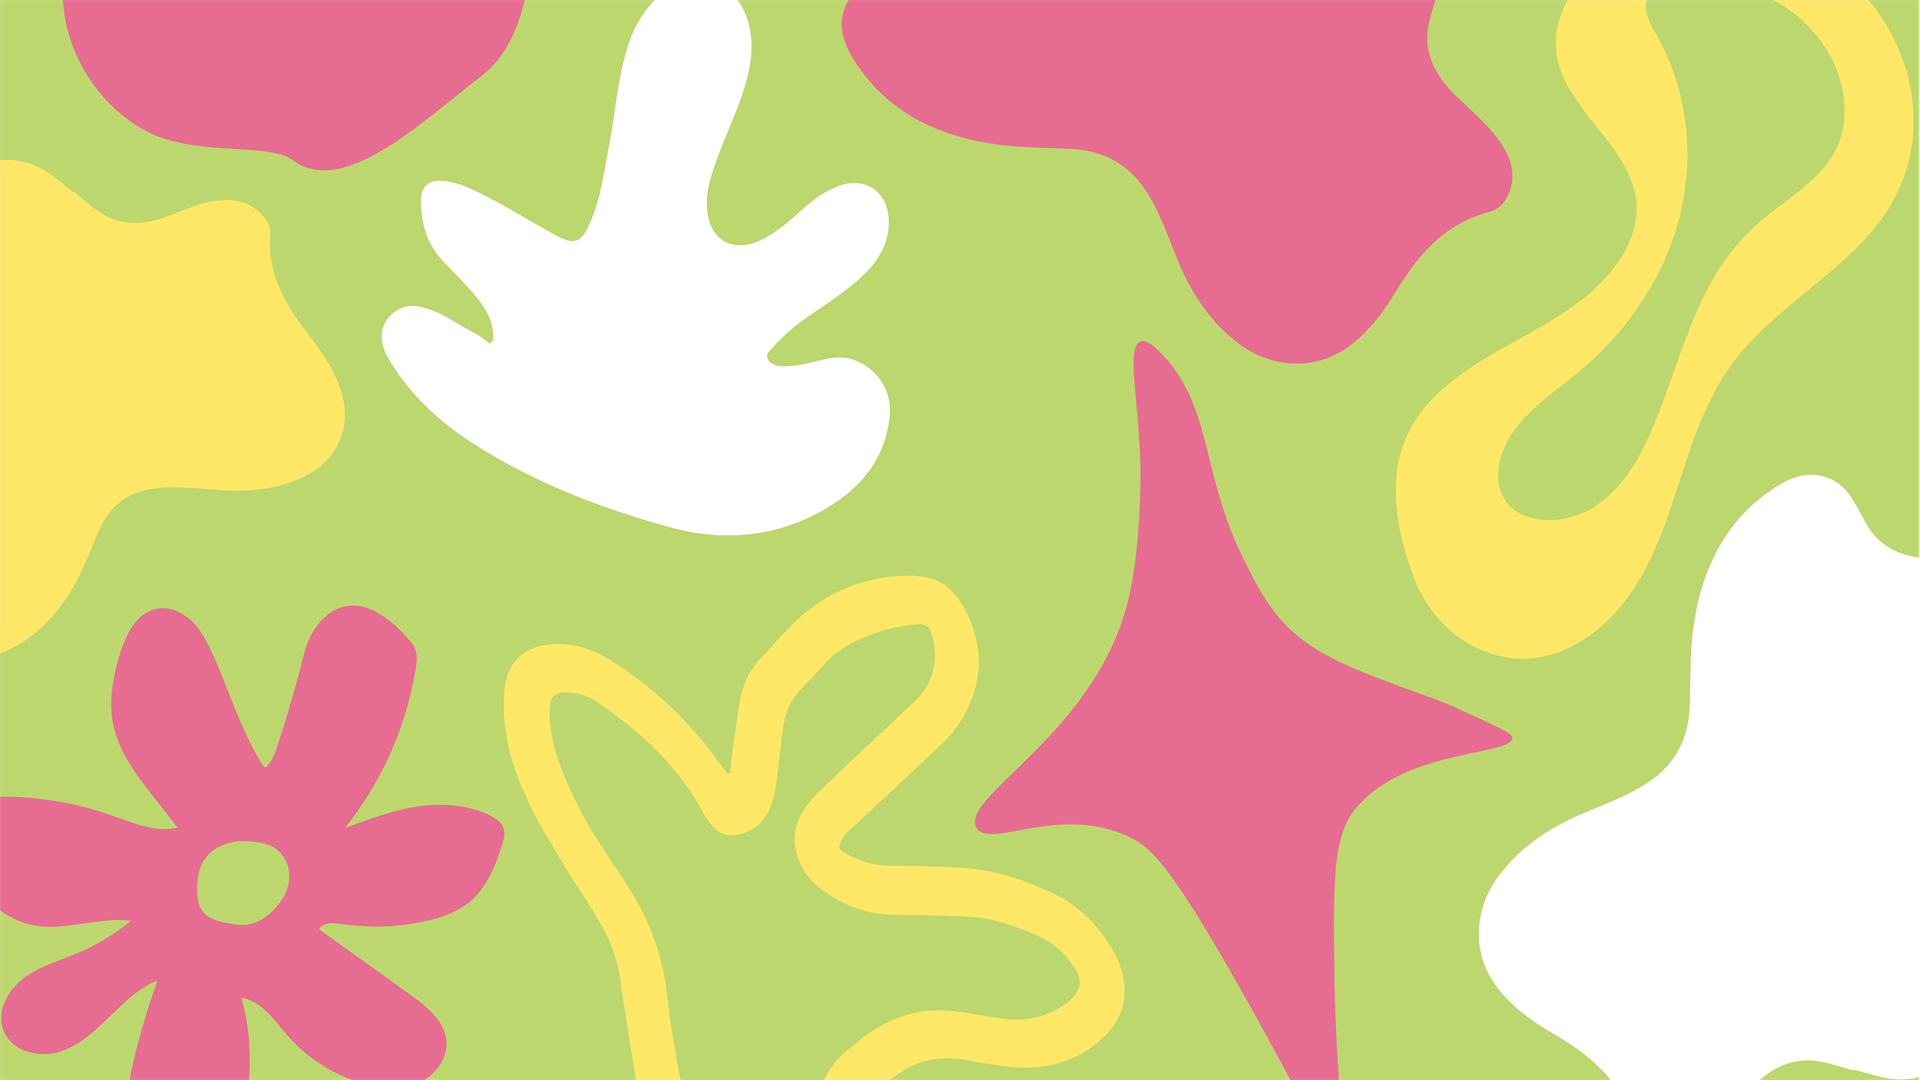 A green background with colourful white, pink and yellow shapes